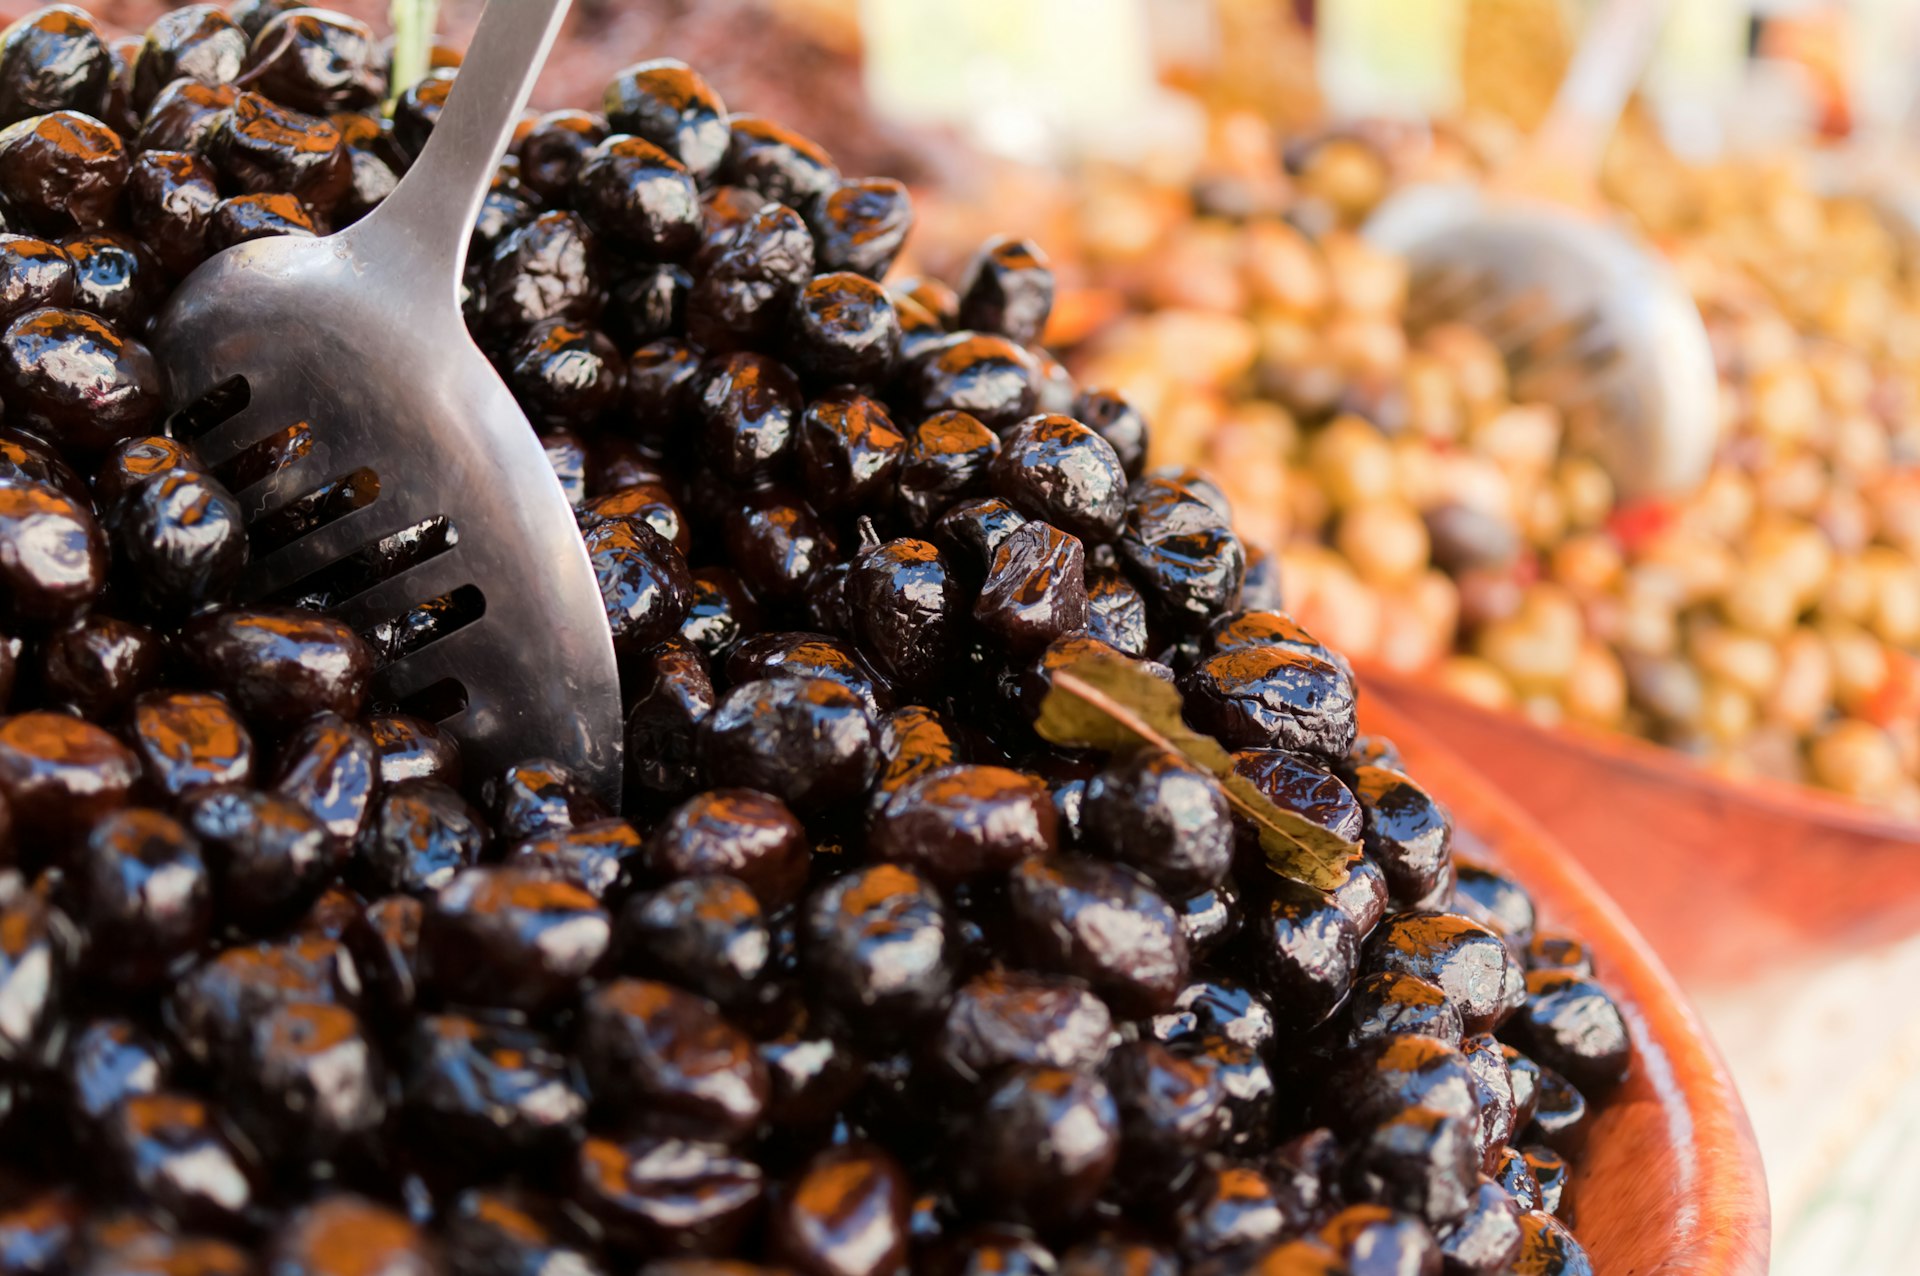 Black olives on a French market stall. Image © G. G. Bruno / Moment / Getty